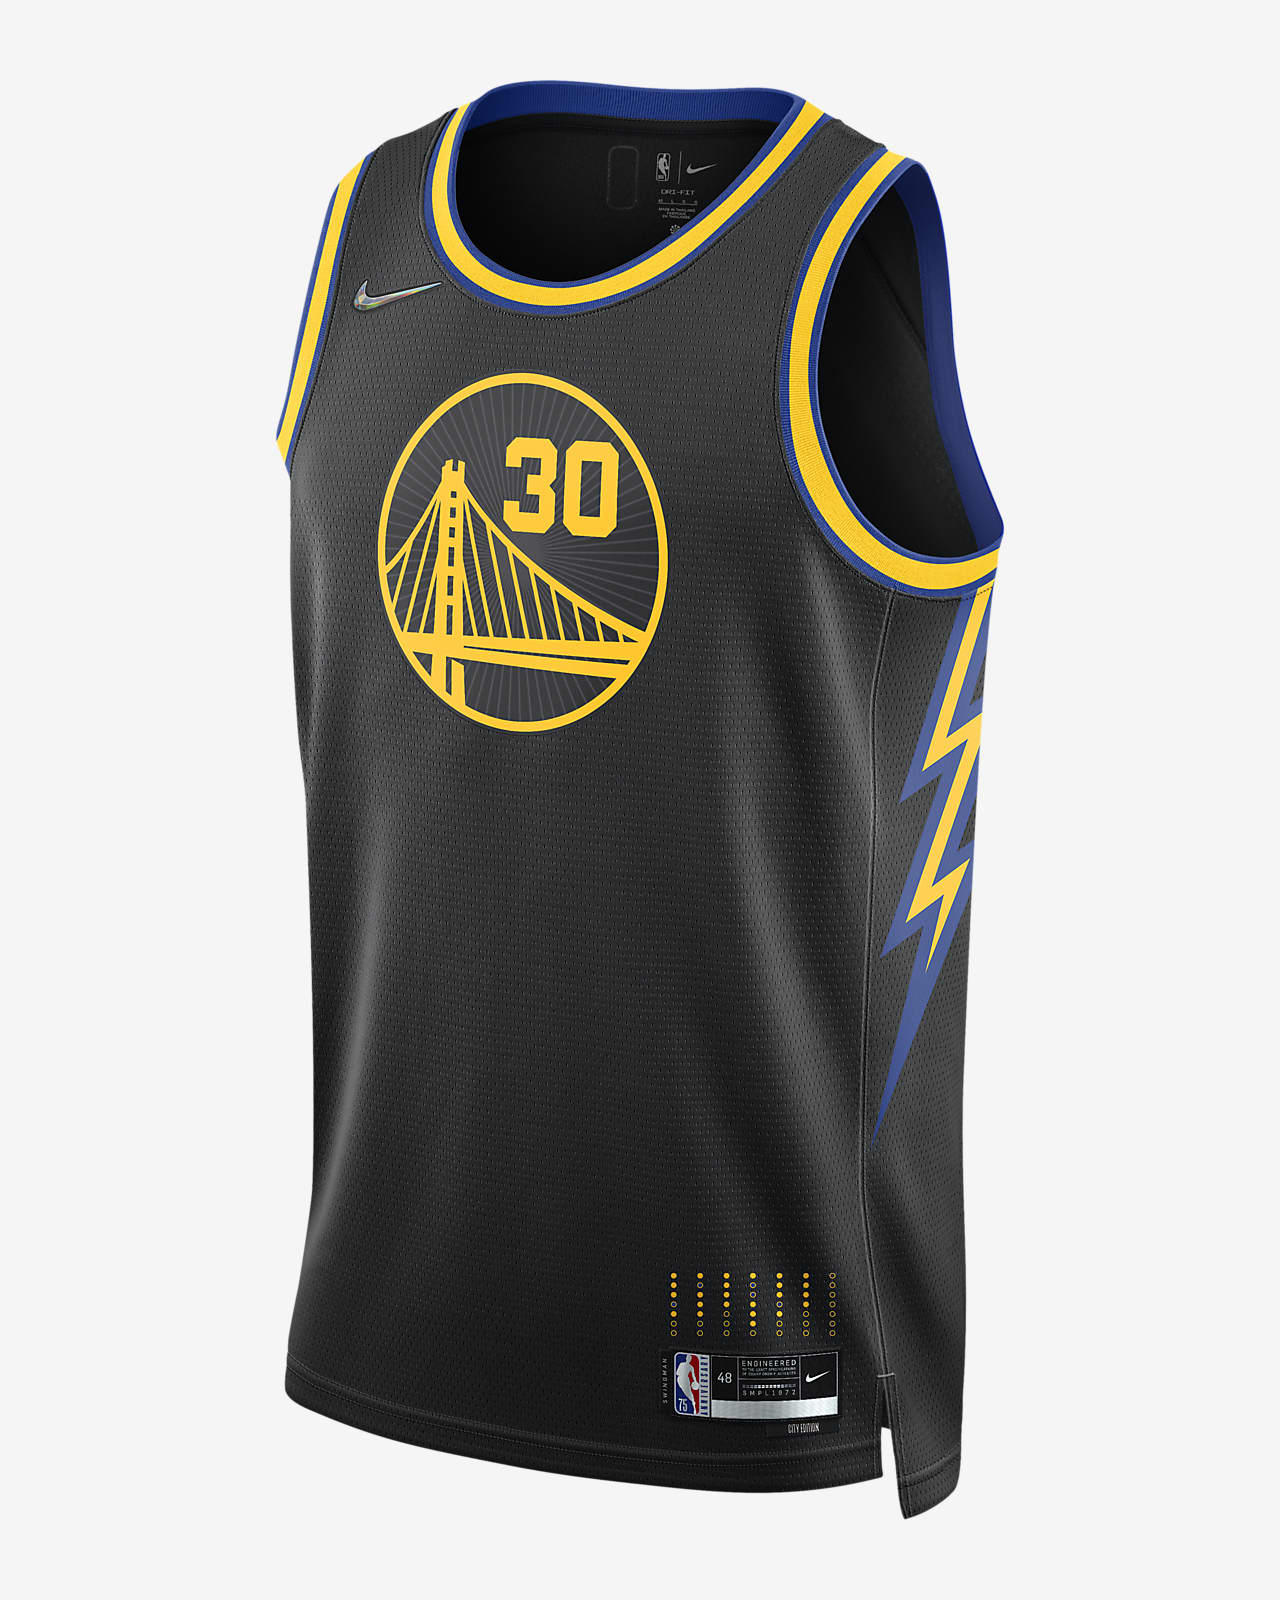 golden state warriors city edition